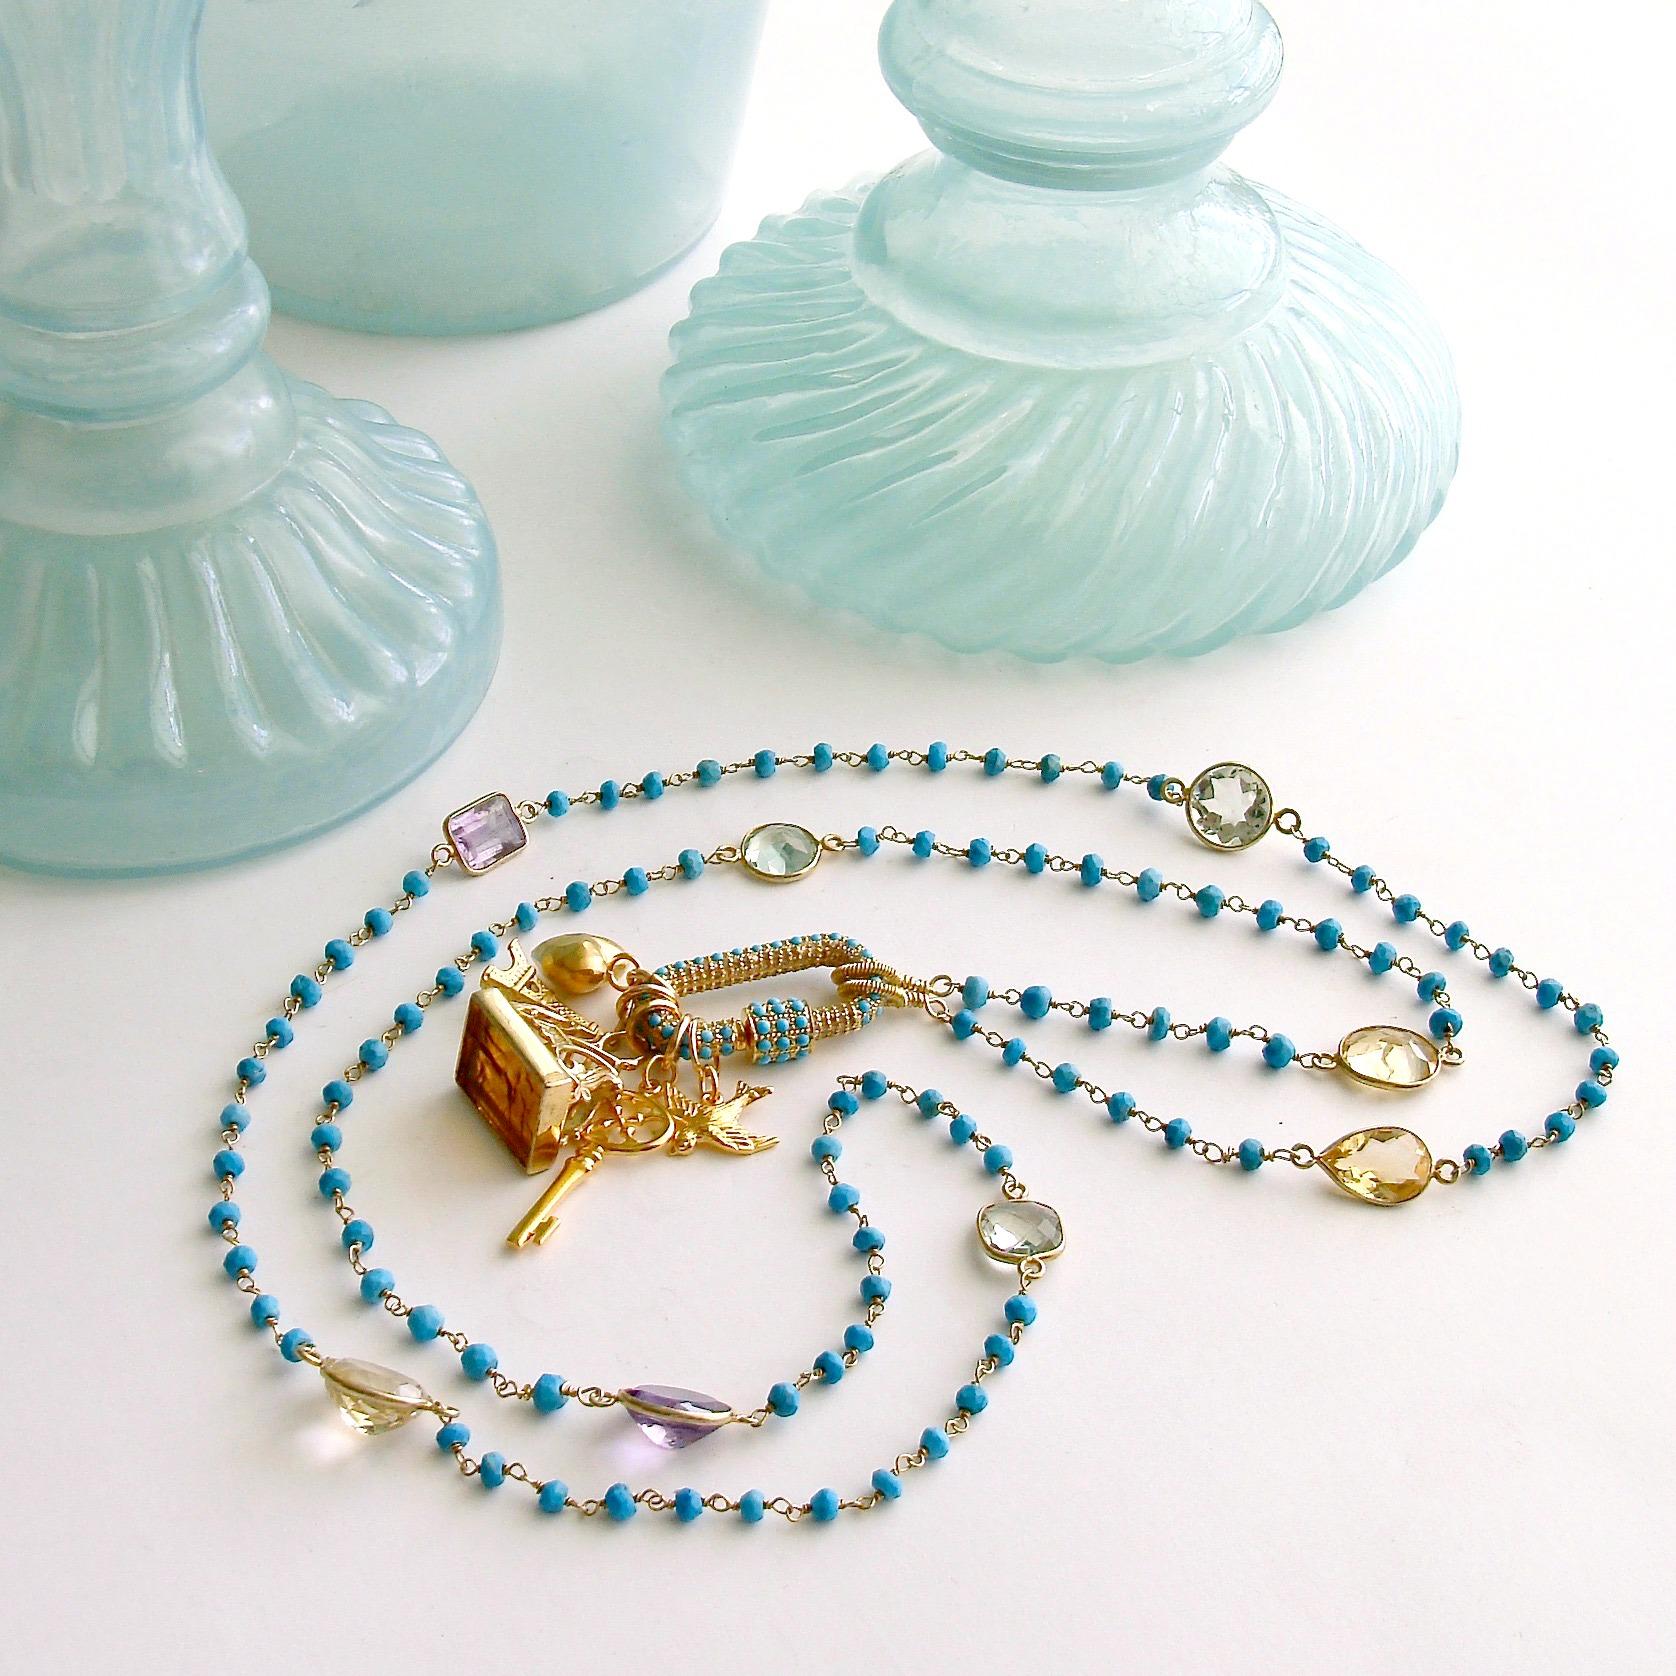 I am always a fan of jewelry designs that lend themselves to change - and this stunning turquoise necklace certainly checks all the boxes.  A long and sinewy hand-linked turquoise chain is interrupted with a medley of bezel set citrine, topaz,